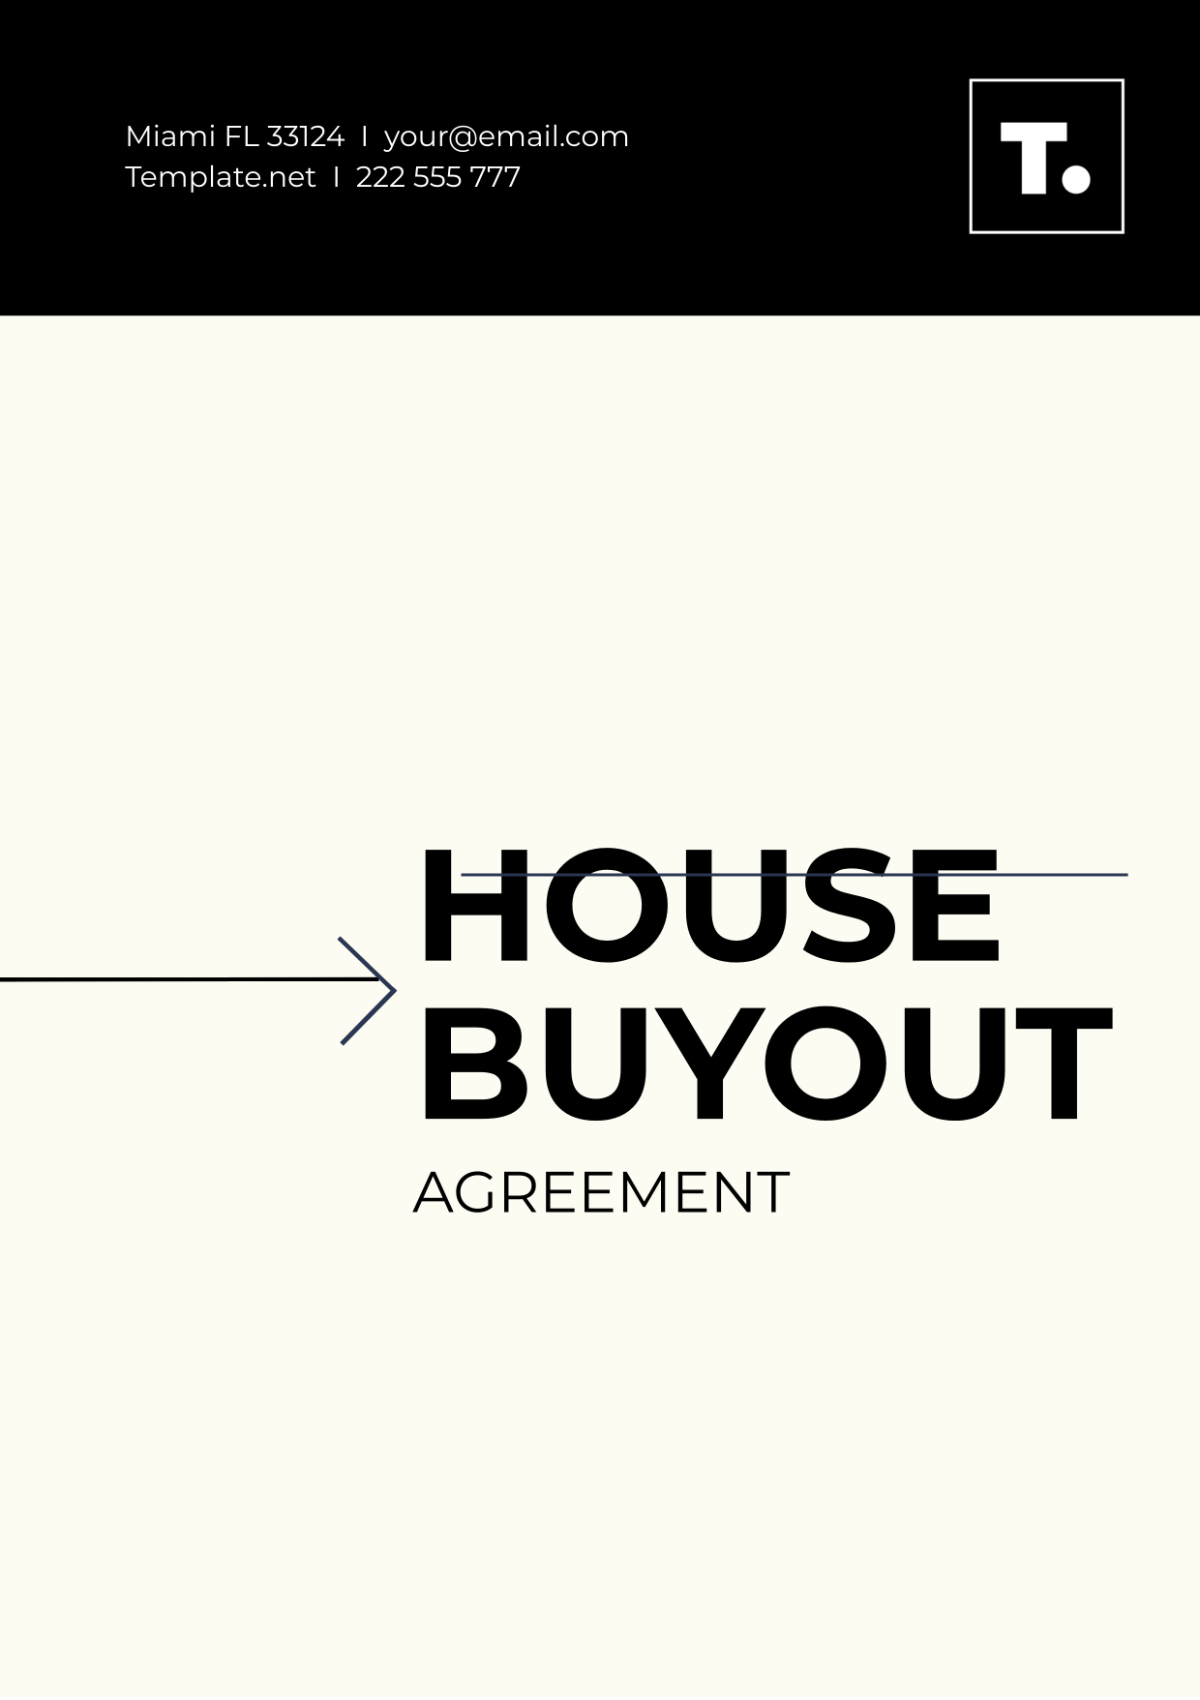 Home Buyout Agreement Template